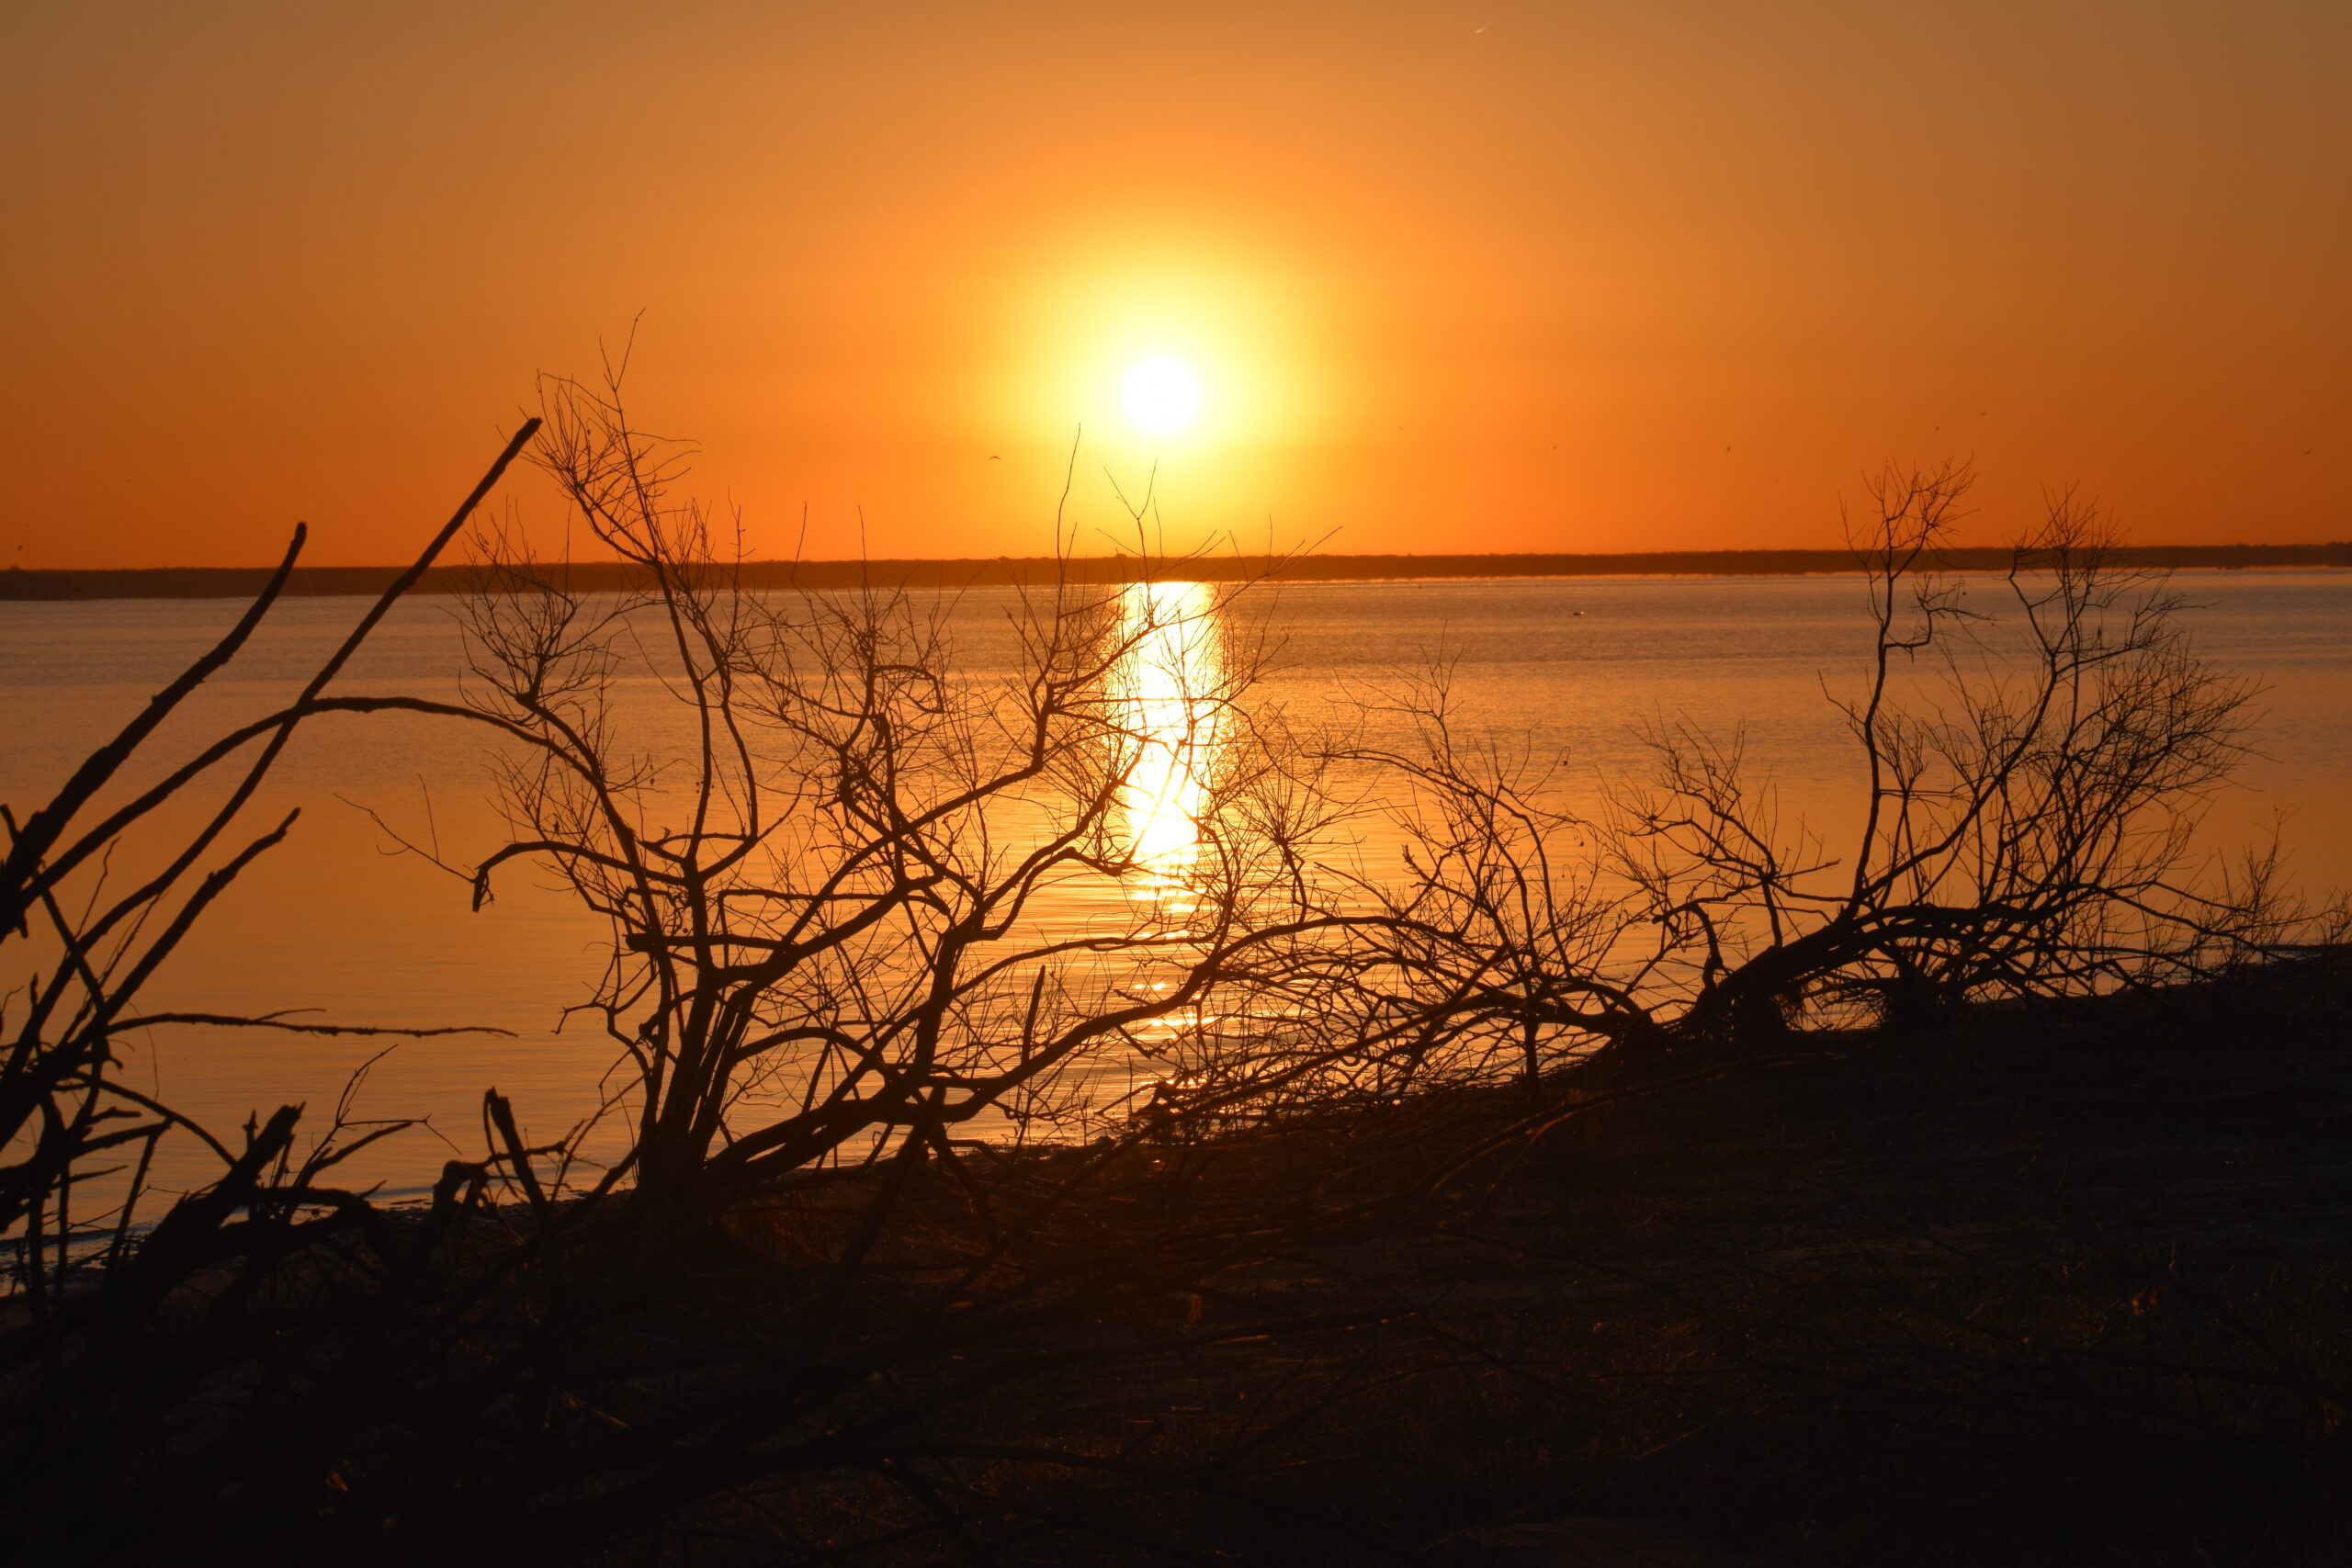 A bright orange sun rises slightly above the horizon with a sky of bright orange. The sky and sun are reflected in the water below. They set off the silhouettes of leafless bushes on the shoreline nearby.